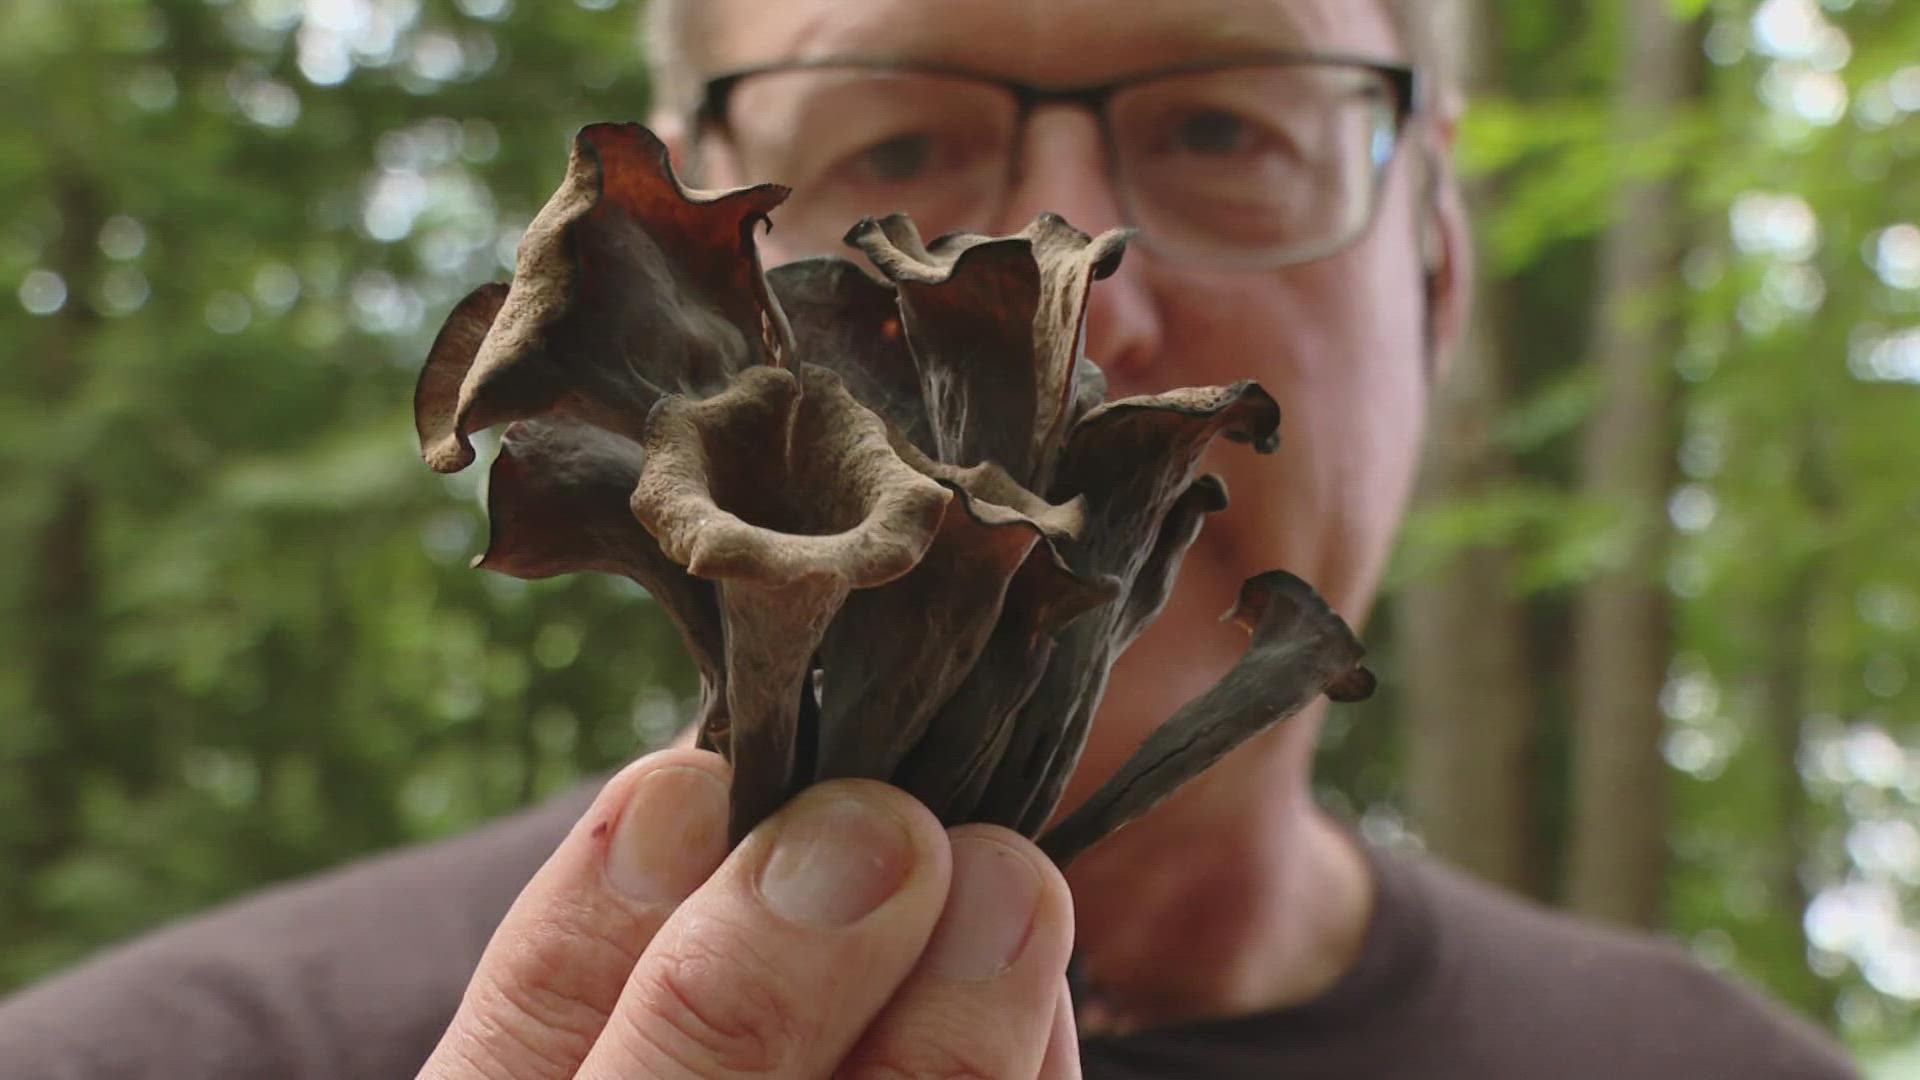 Foraging for mushrooms fills Kevyn Fowler with delight